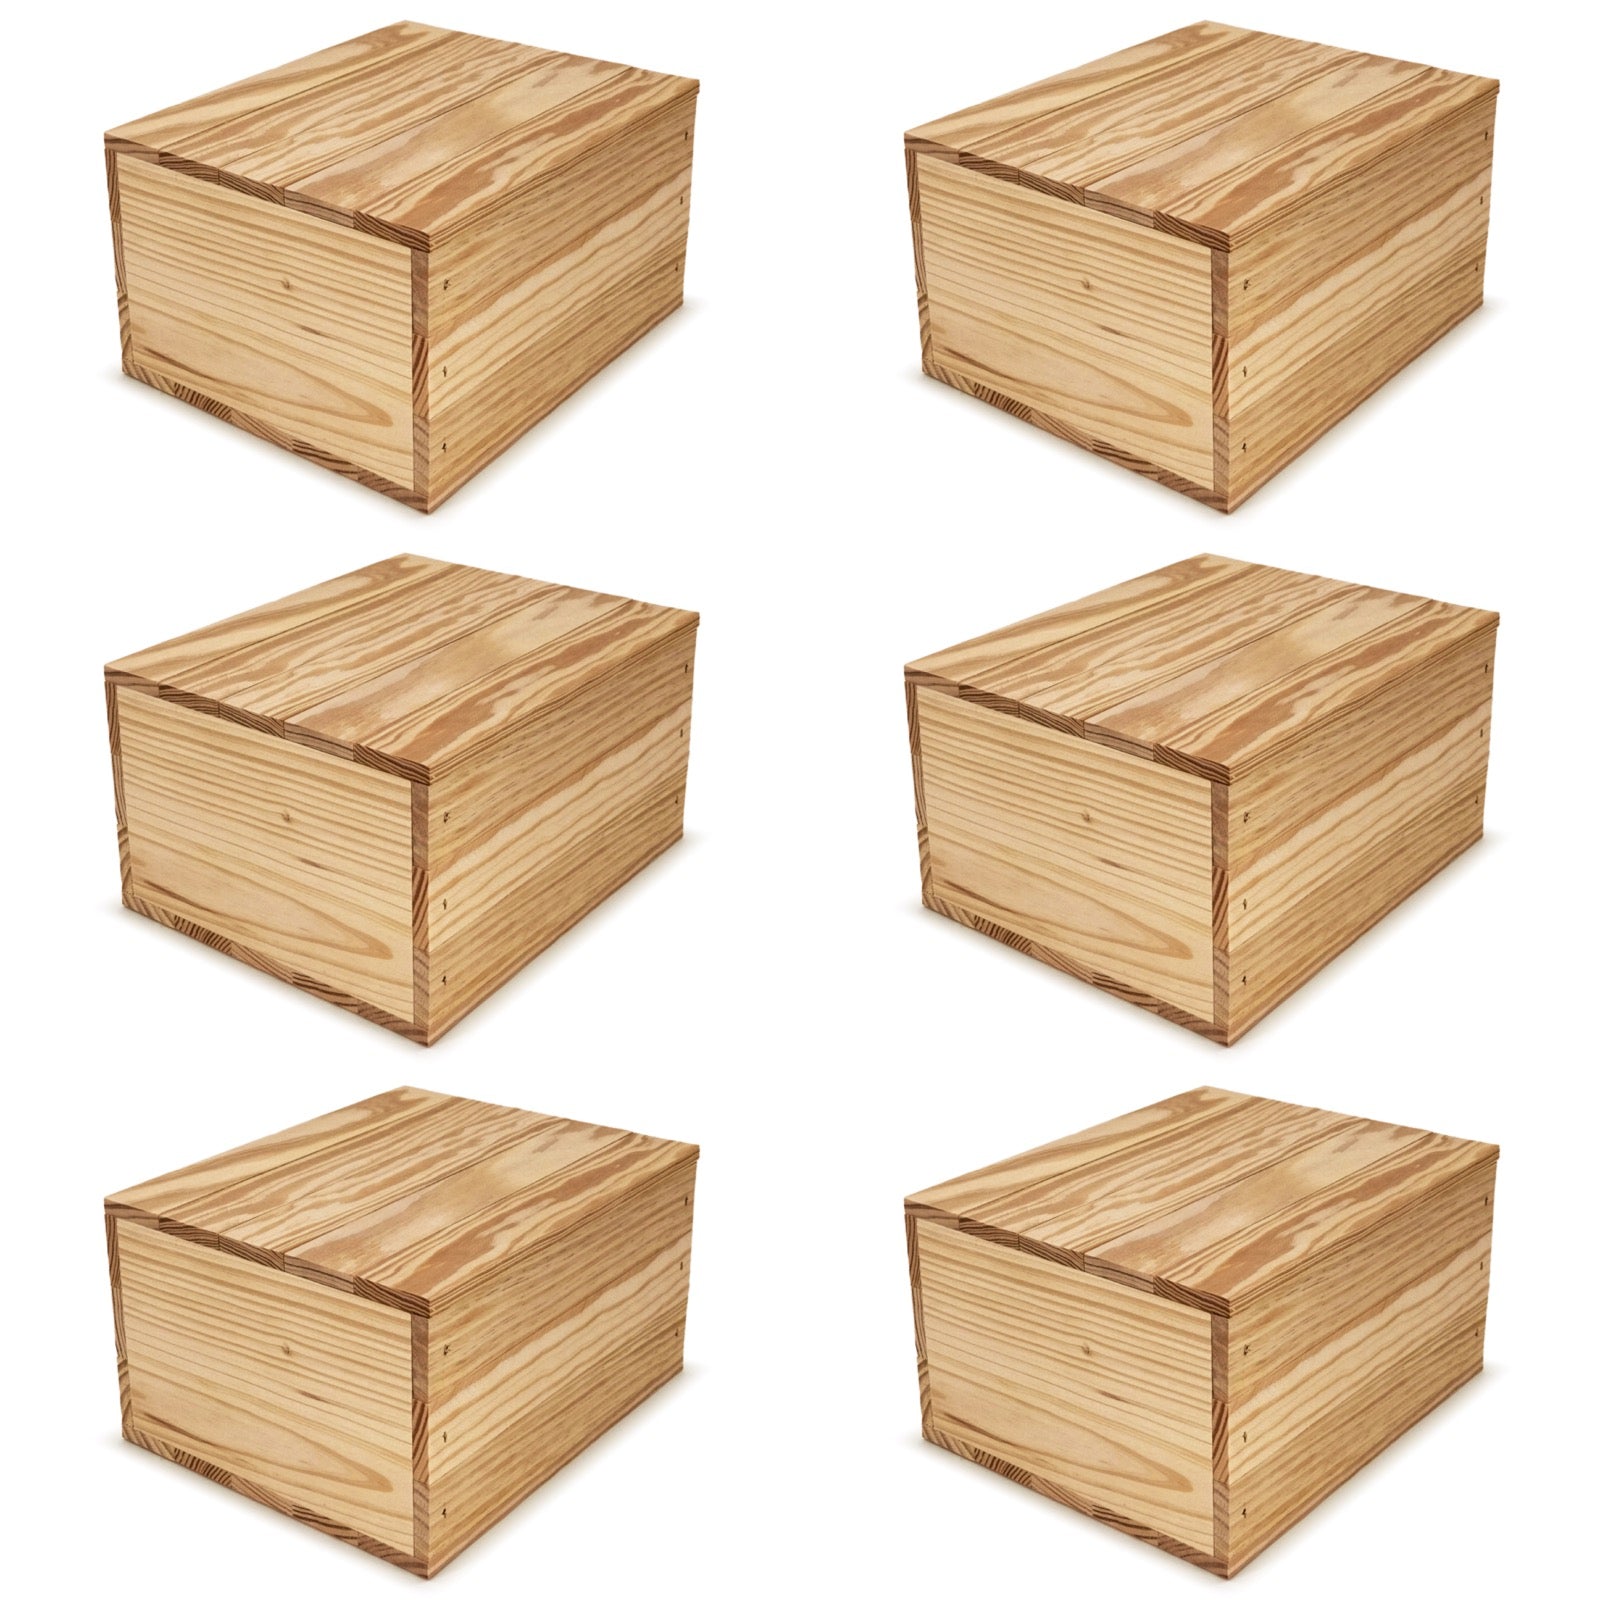 6 Small wooden crates with lid 9x8x5.25